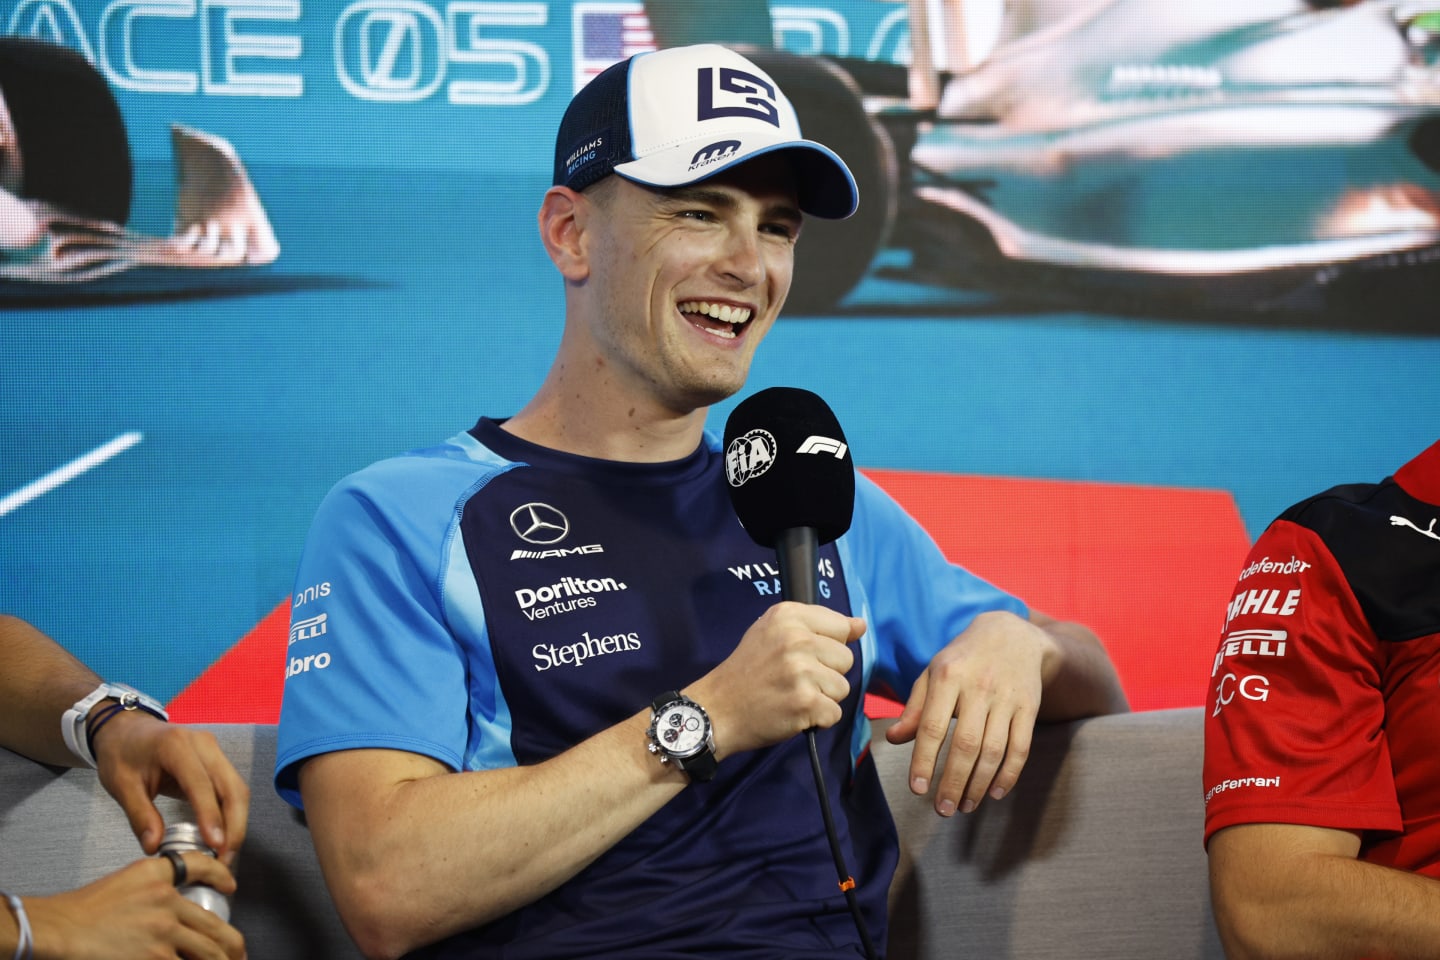 MIAMI, FLORIDA - MAY 04: Logan Sargeant of United States and Williams attends the Drivers Press Conference during previews ahead of the F1 Grand Prix of Miami at Miami International Autodrome on May 04, 2023 in Miami, Florida. (Photo by Jared C. Tilton/Getty Images)